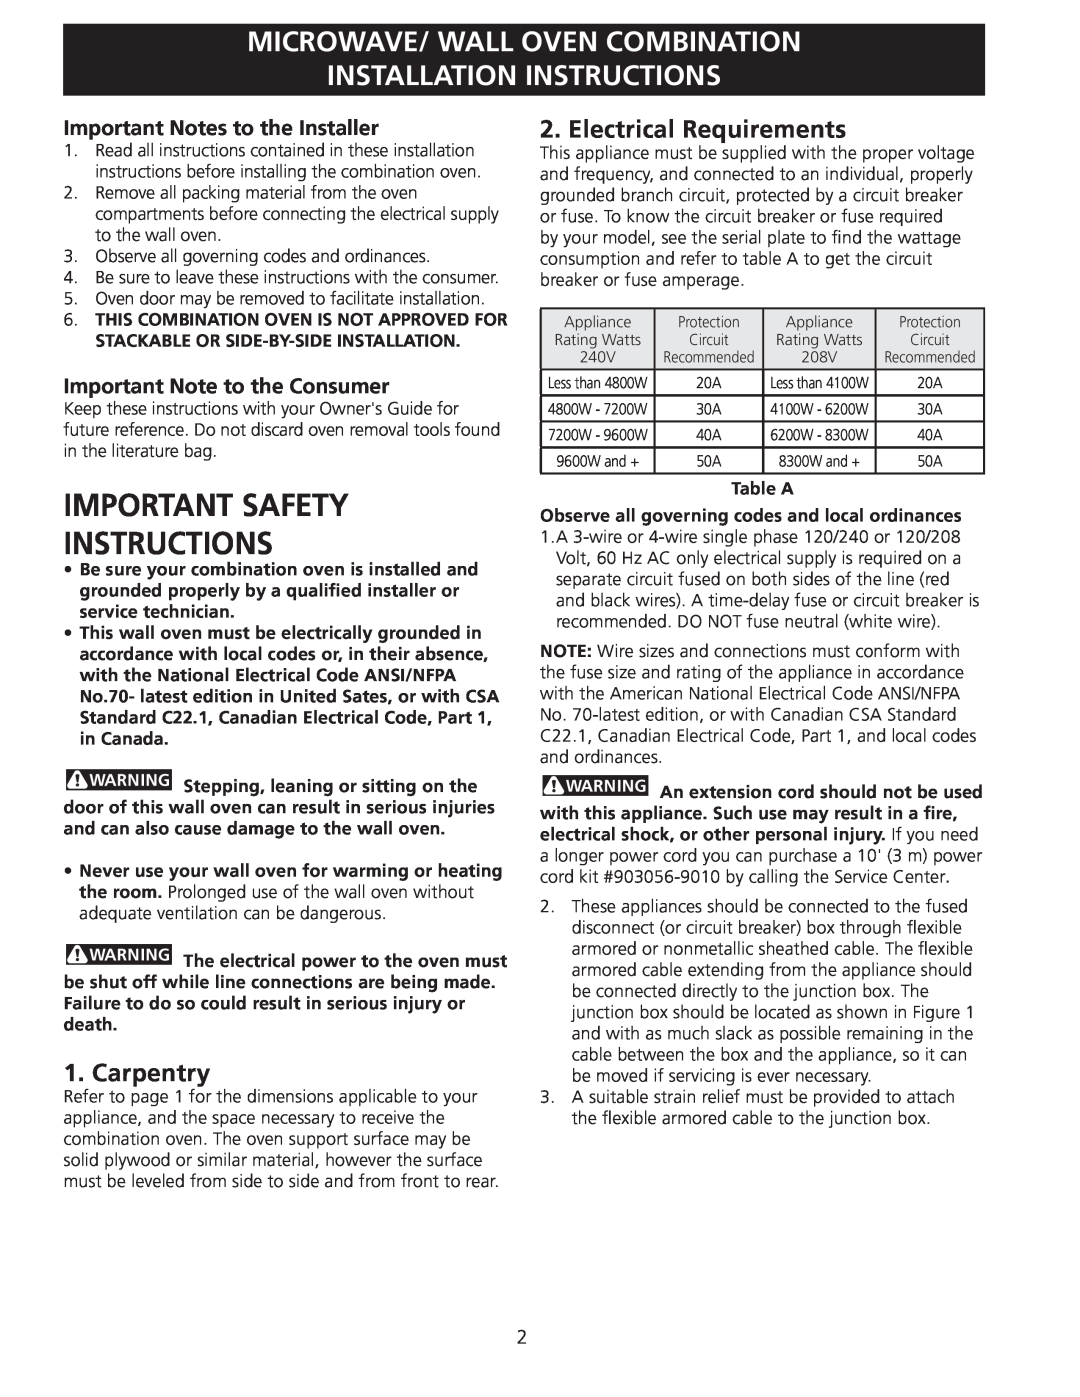 Frigidaire 318201534 Important Safety Instructions, Carpentry, Electrical Requirements, Important Notes to the Installer 